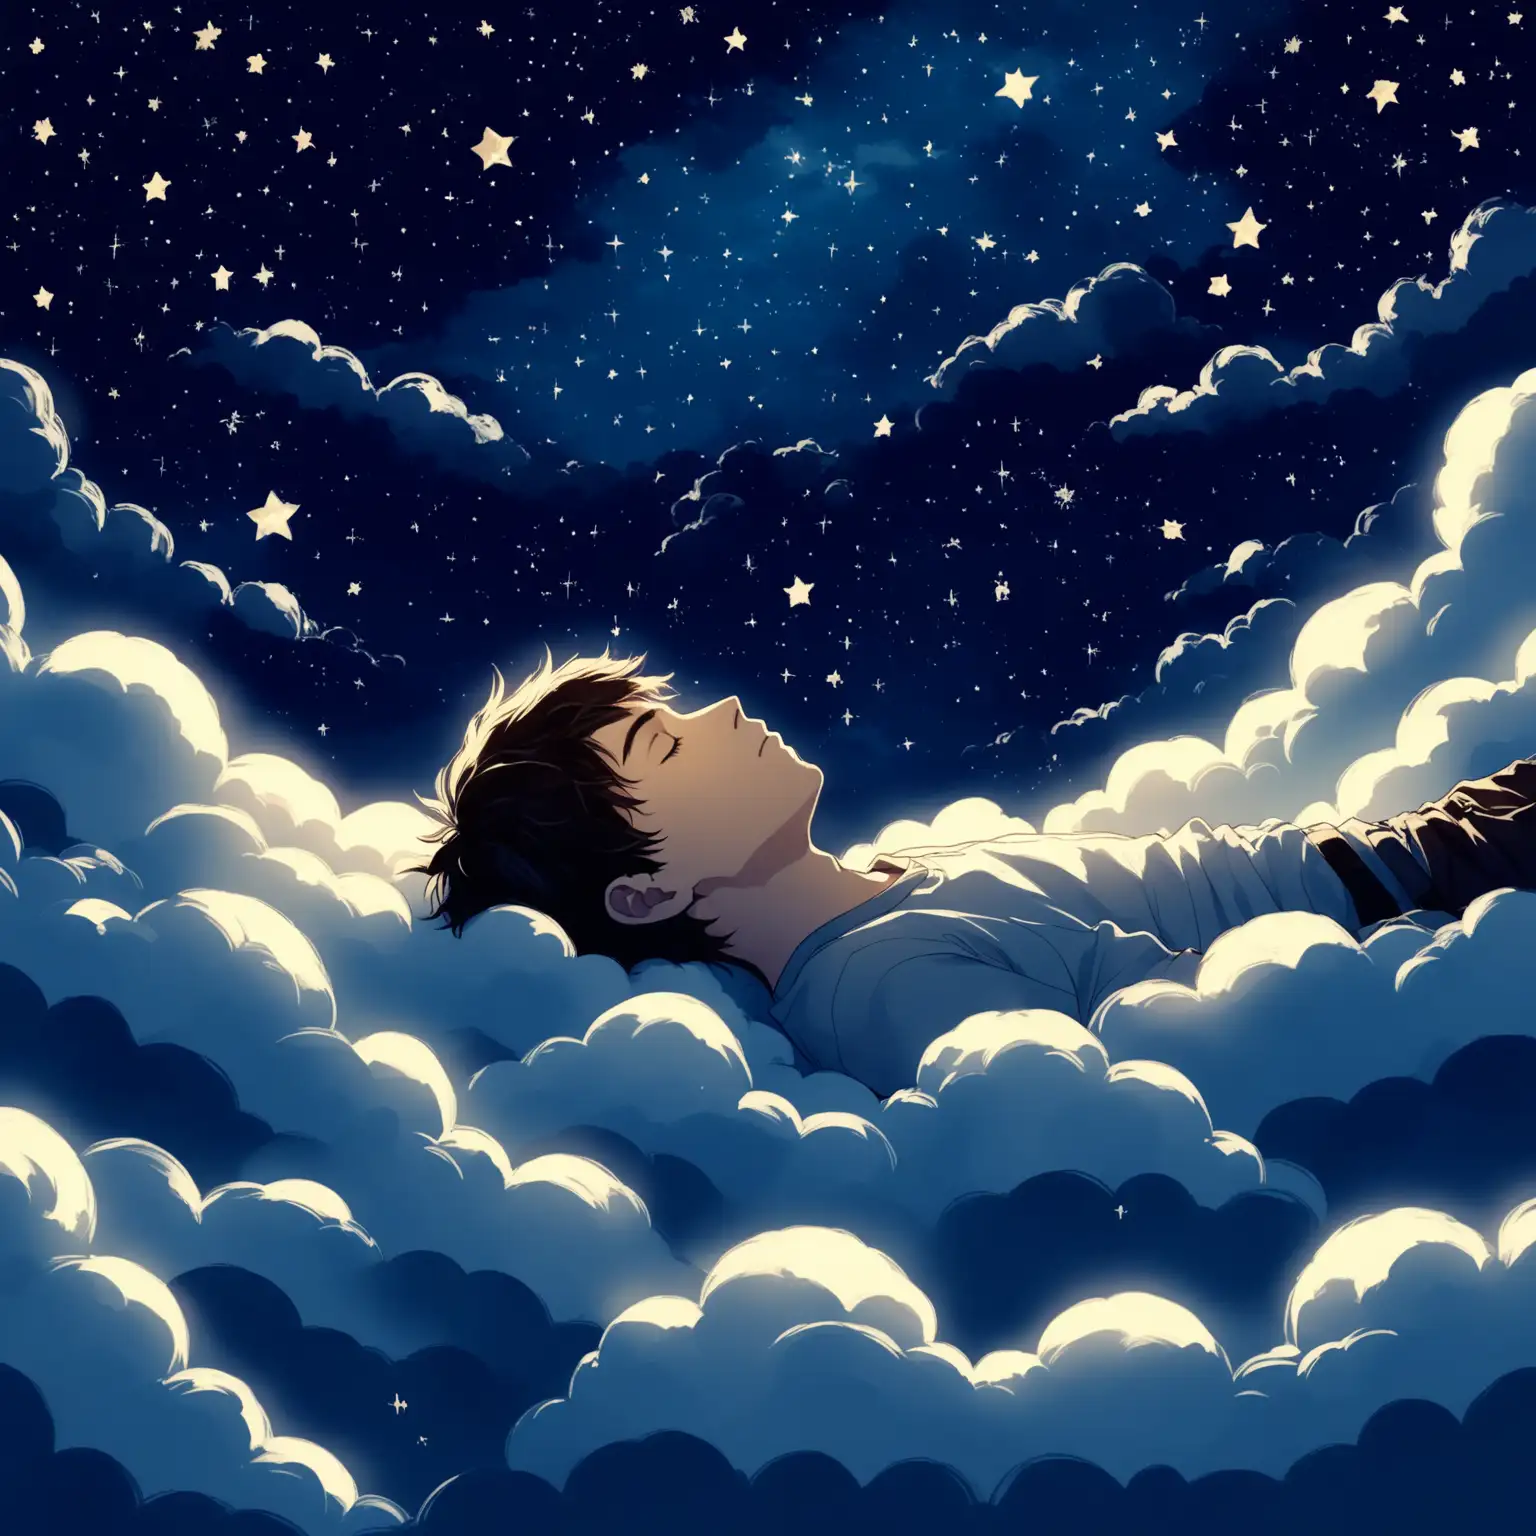 Young-Man-Sleeping-on-Clouds-Under-Starry-Night-Sky